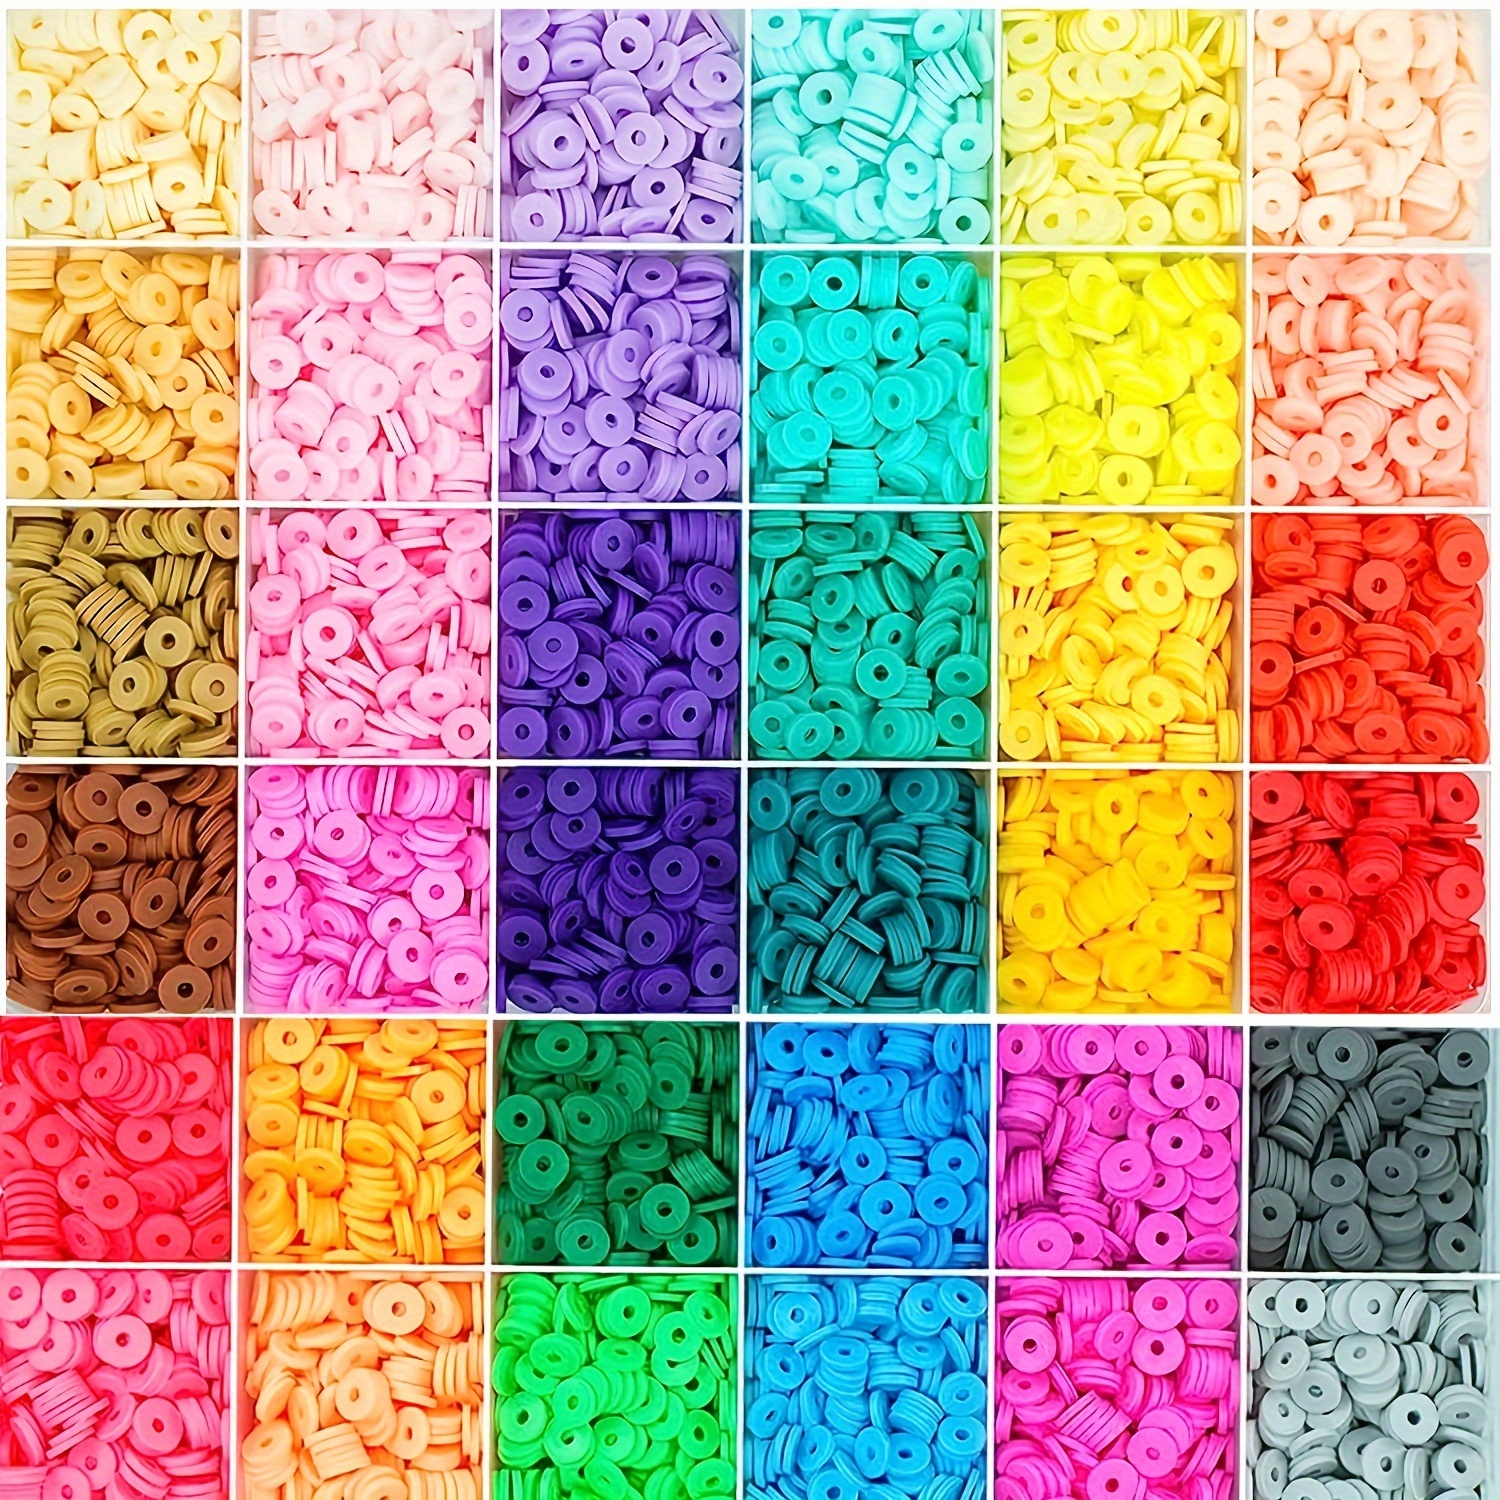 

5000pcs 6mm Mixed Color Polymer Clay Beads For Jewelry Making Diy Bracelet Necklace Earrings Holiday Gift With Accessories Craft Supplies